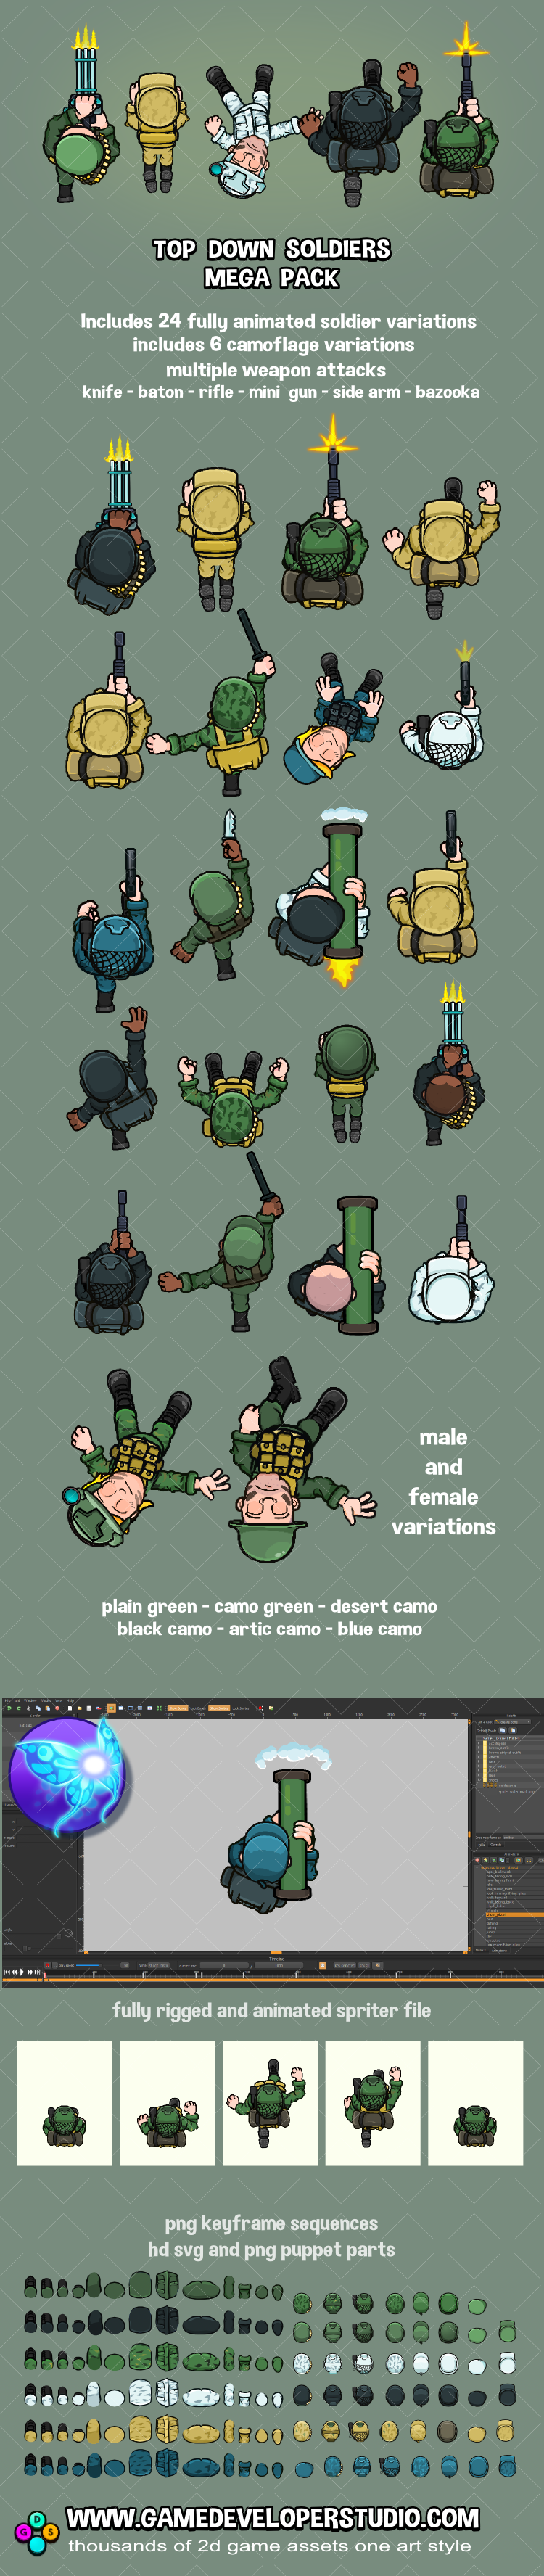 Top down animated soldiers game character pack by Robert Brooks ...